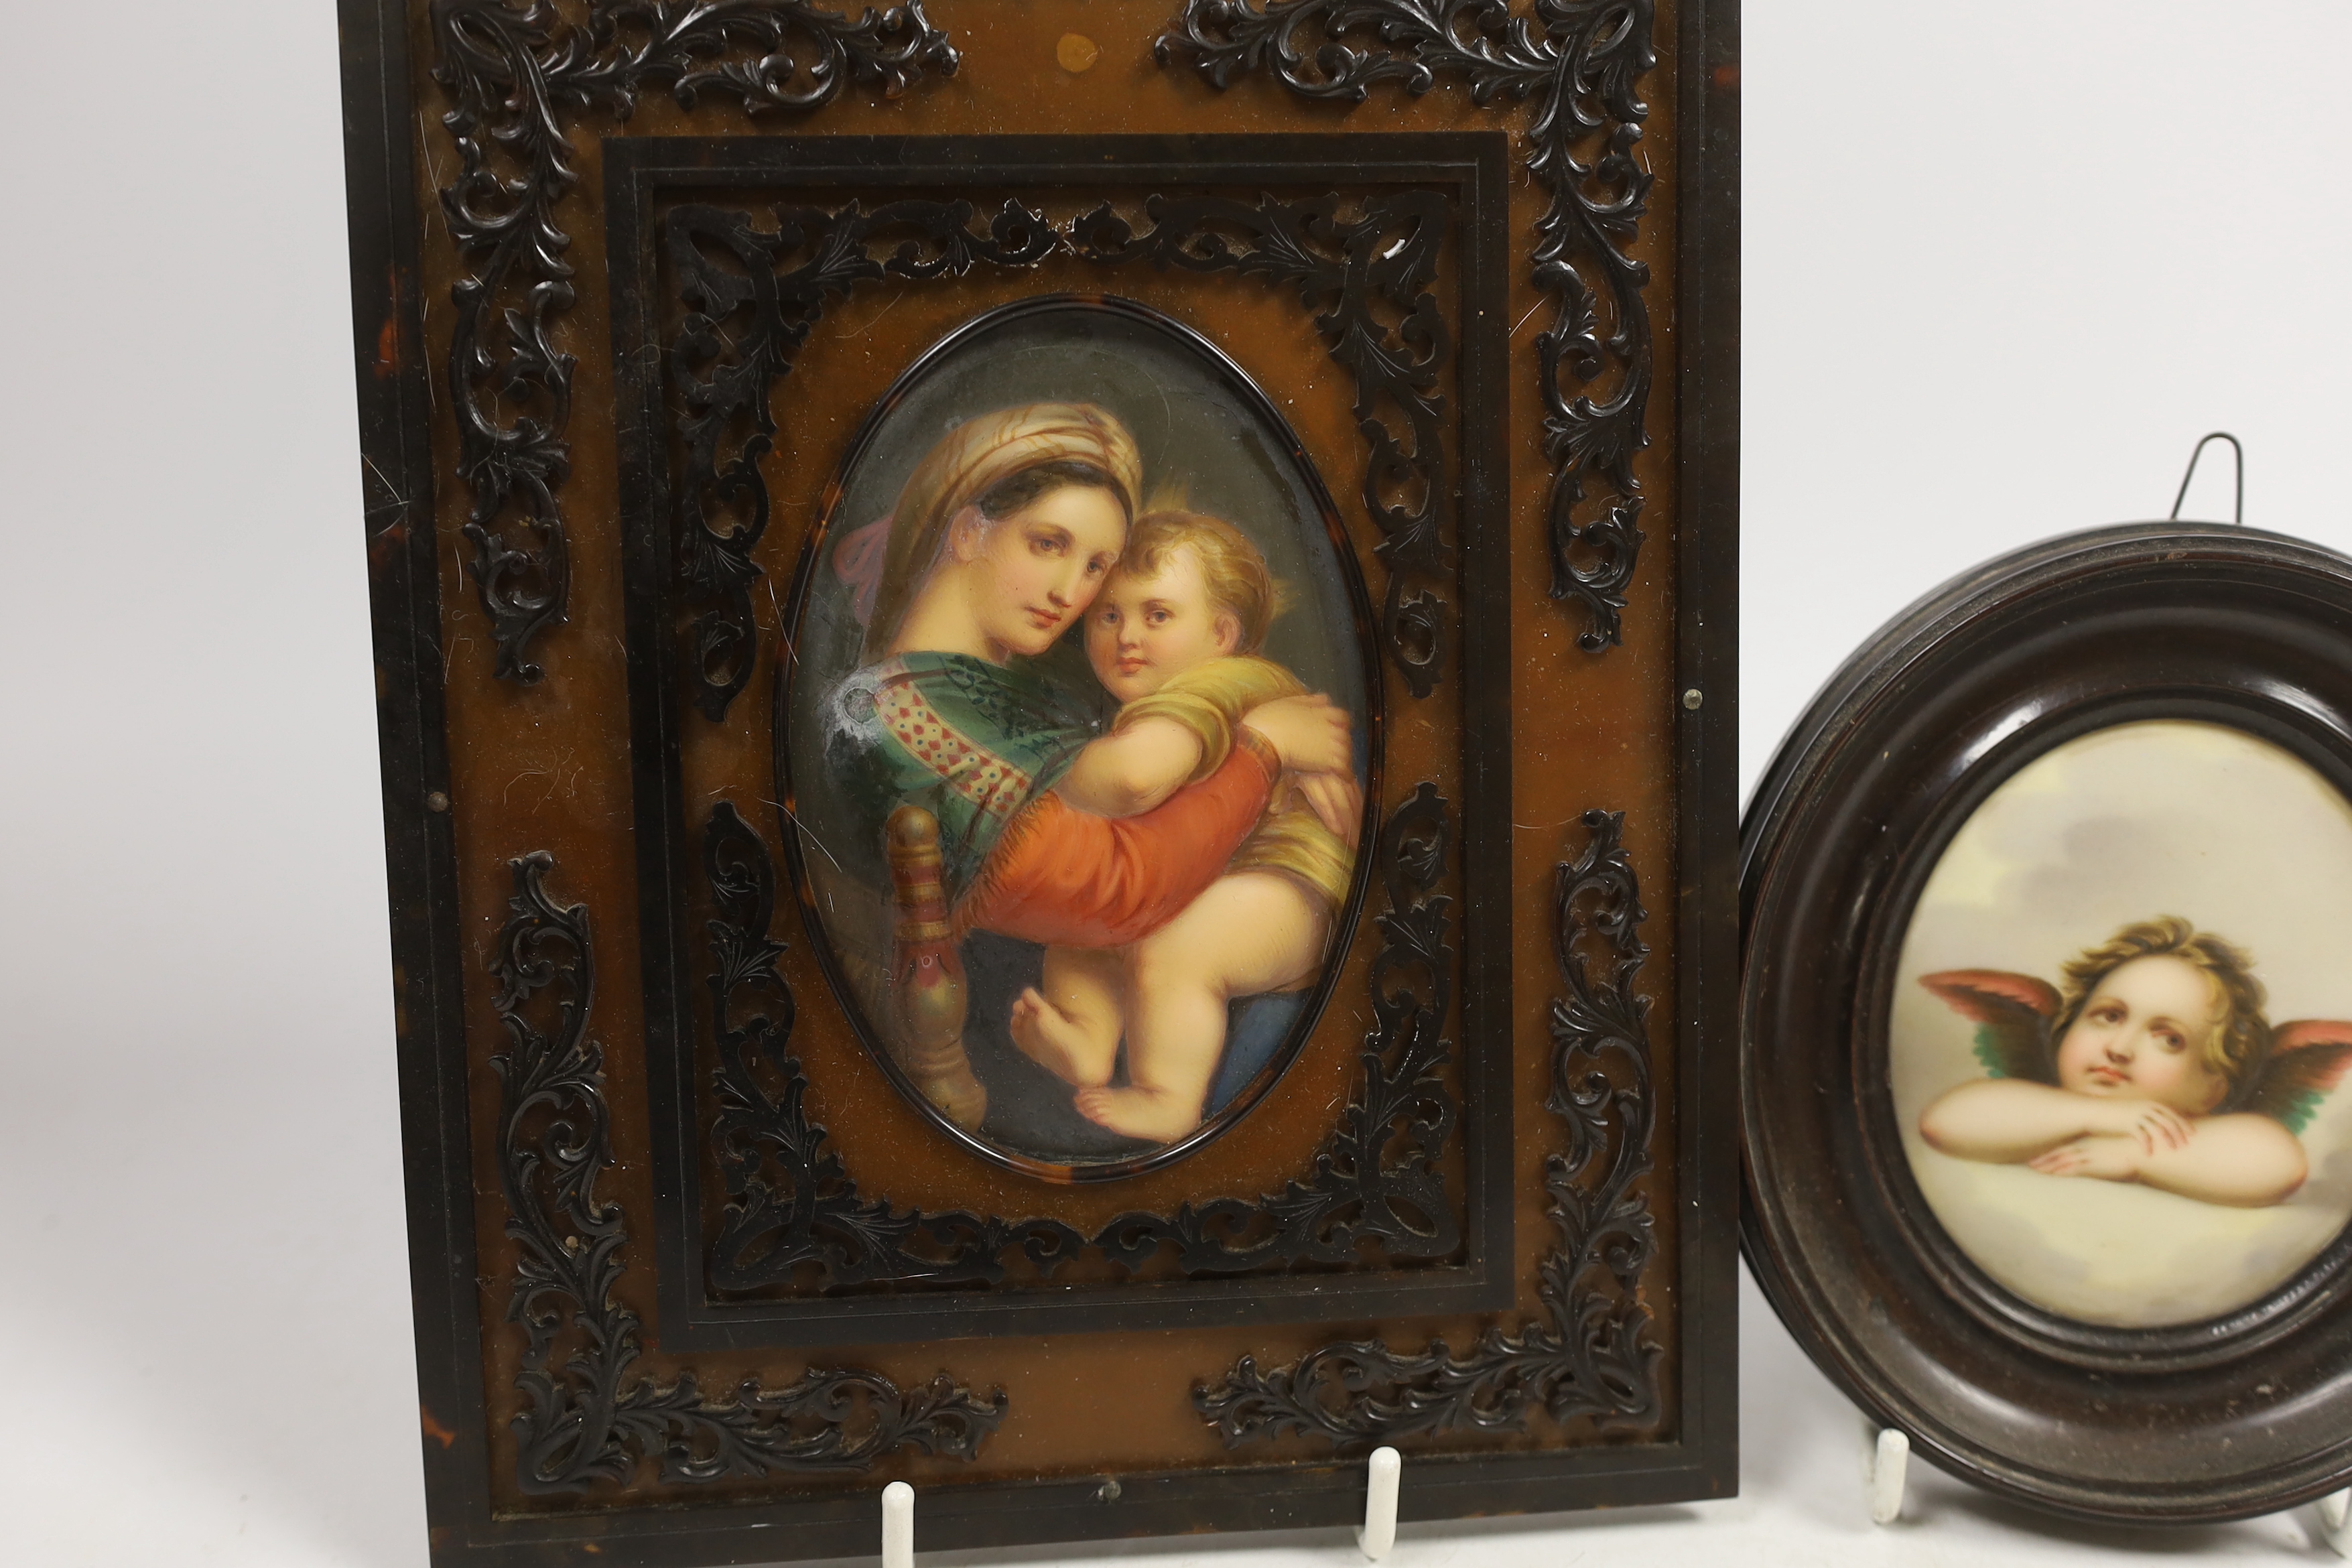 An oval porcelain plaque of mother and child in an ornate frame and a smaller circular porcelain plaque of a putti, mother and child plaque 10.5cm high